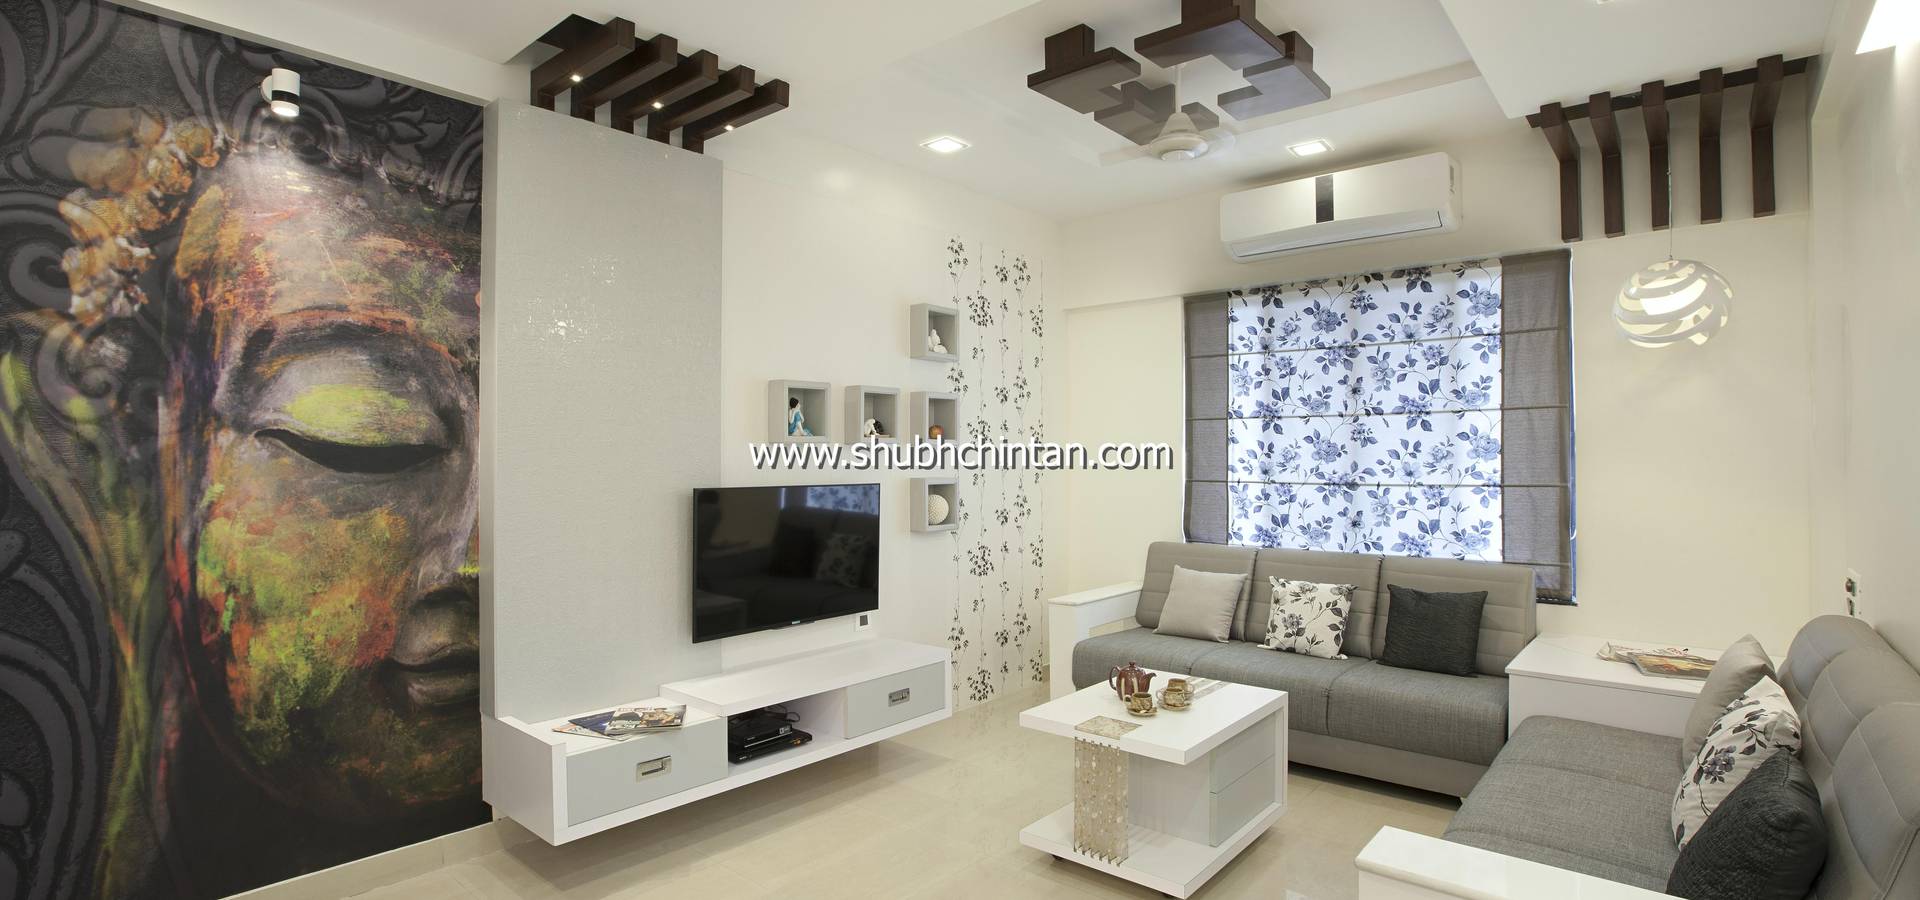 Shubhchintan Interior Architects In Pune Homify